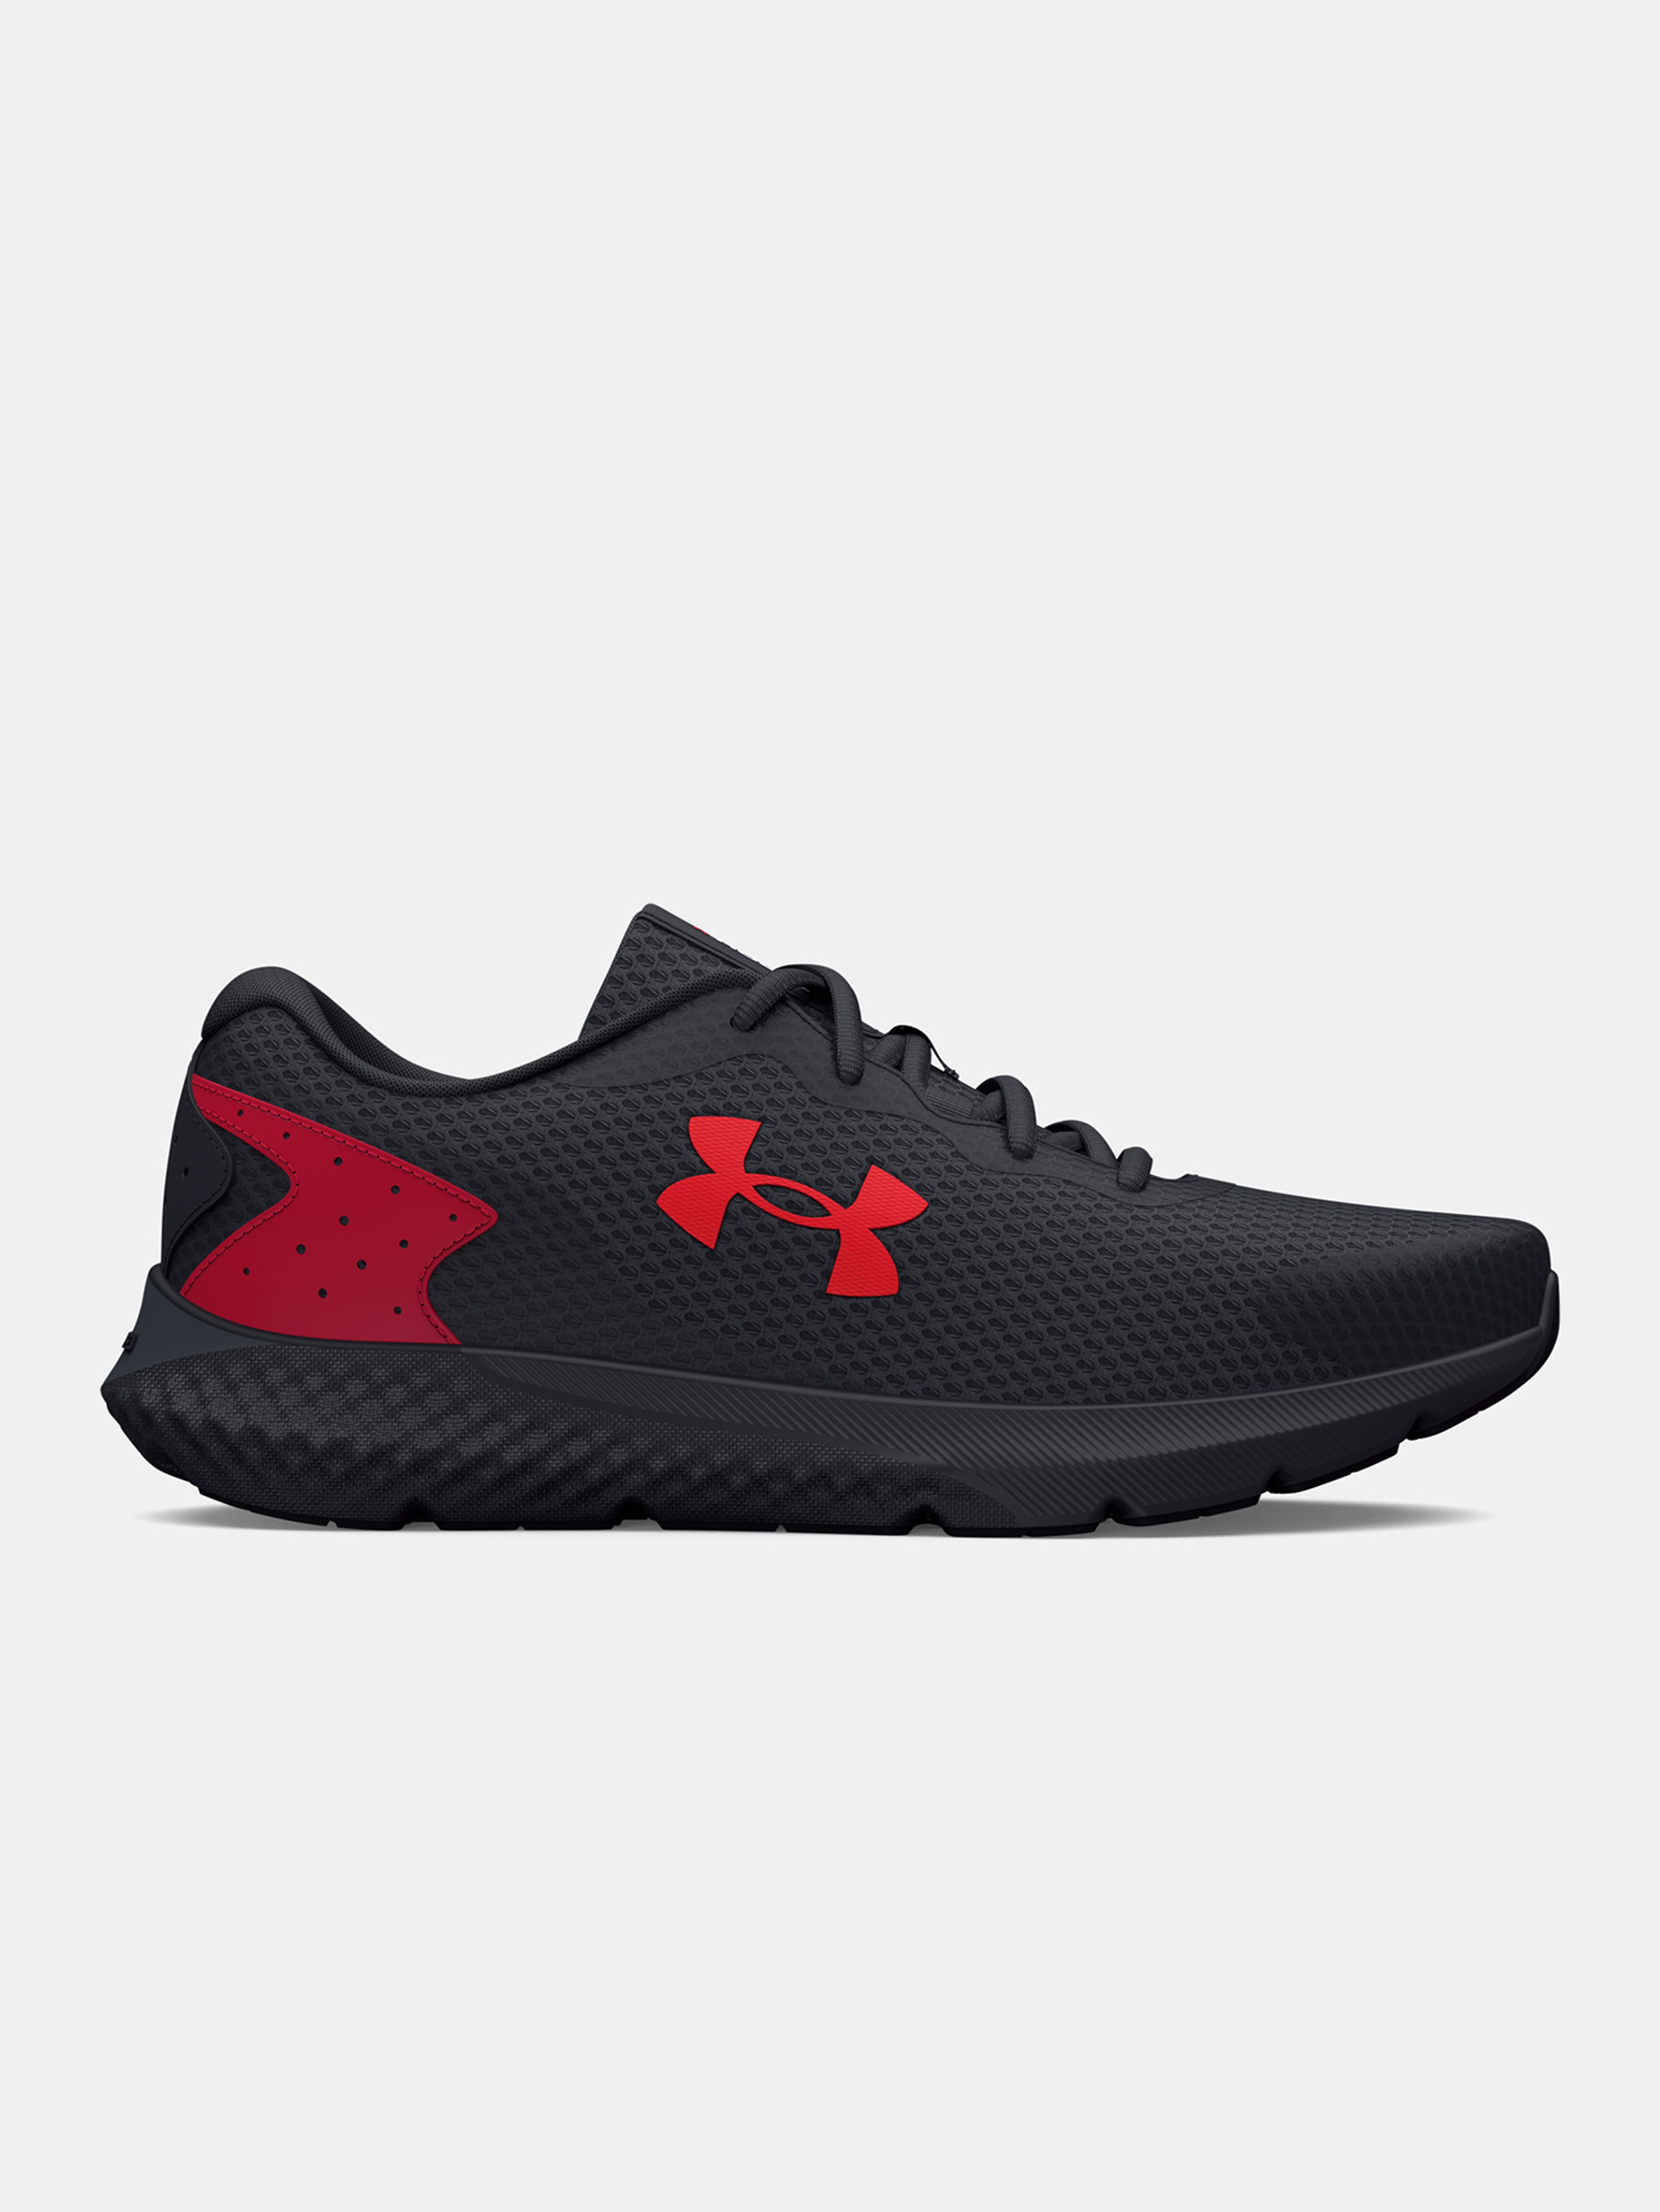 Boty Under Armour UA Charged Rogue 3-BLK